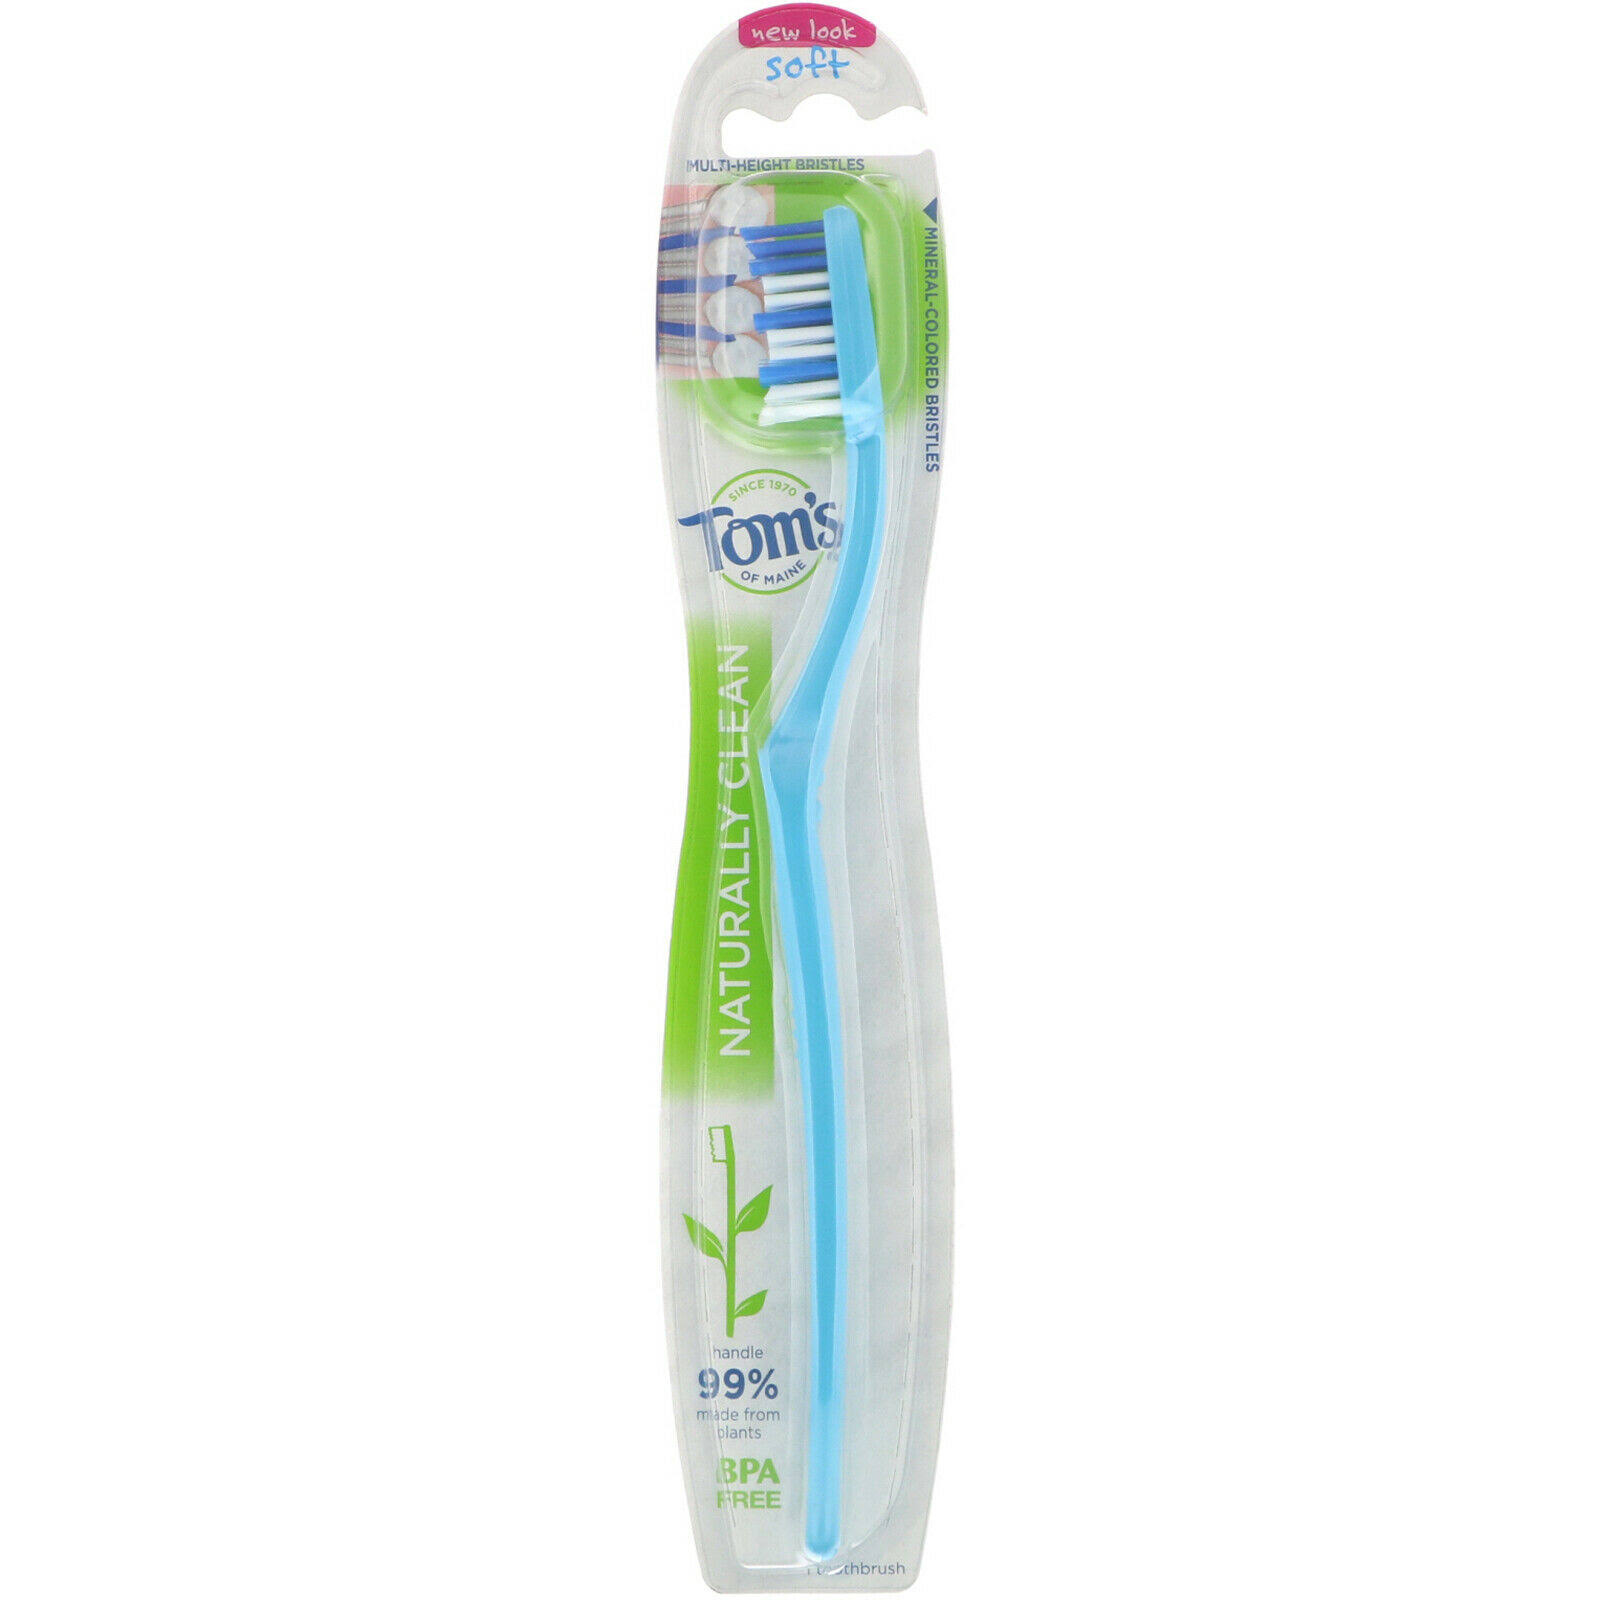 Toms of Maine Naturally Clean Toothbrush - Soft